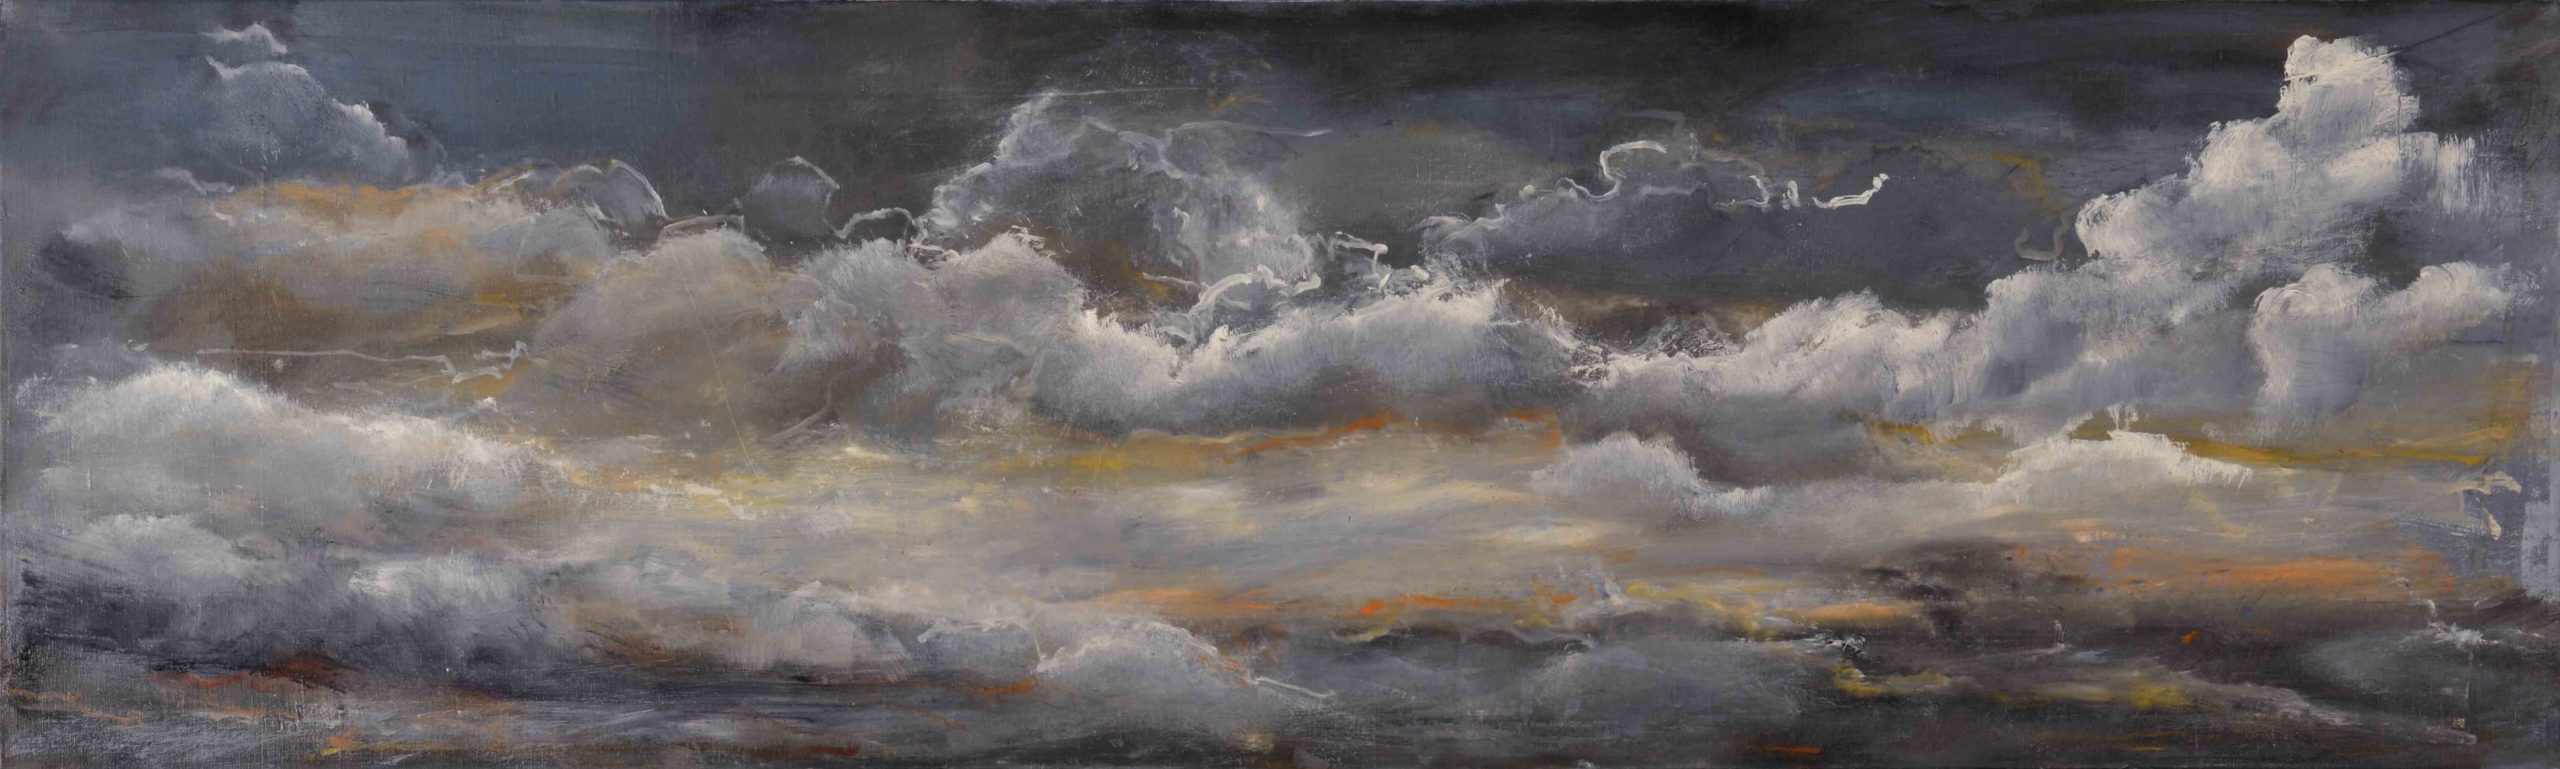 
							

									Clarice Smith									Skyscape 5 2013									oil on canvas<br />
15 1/4 x 50 in									


							